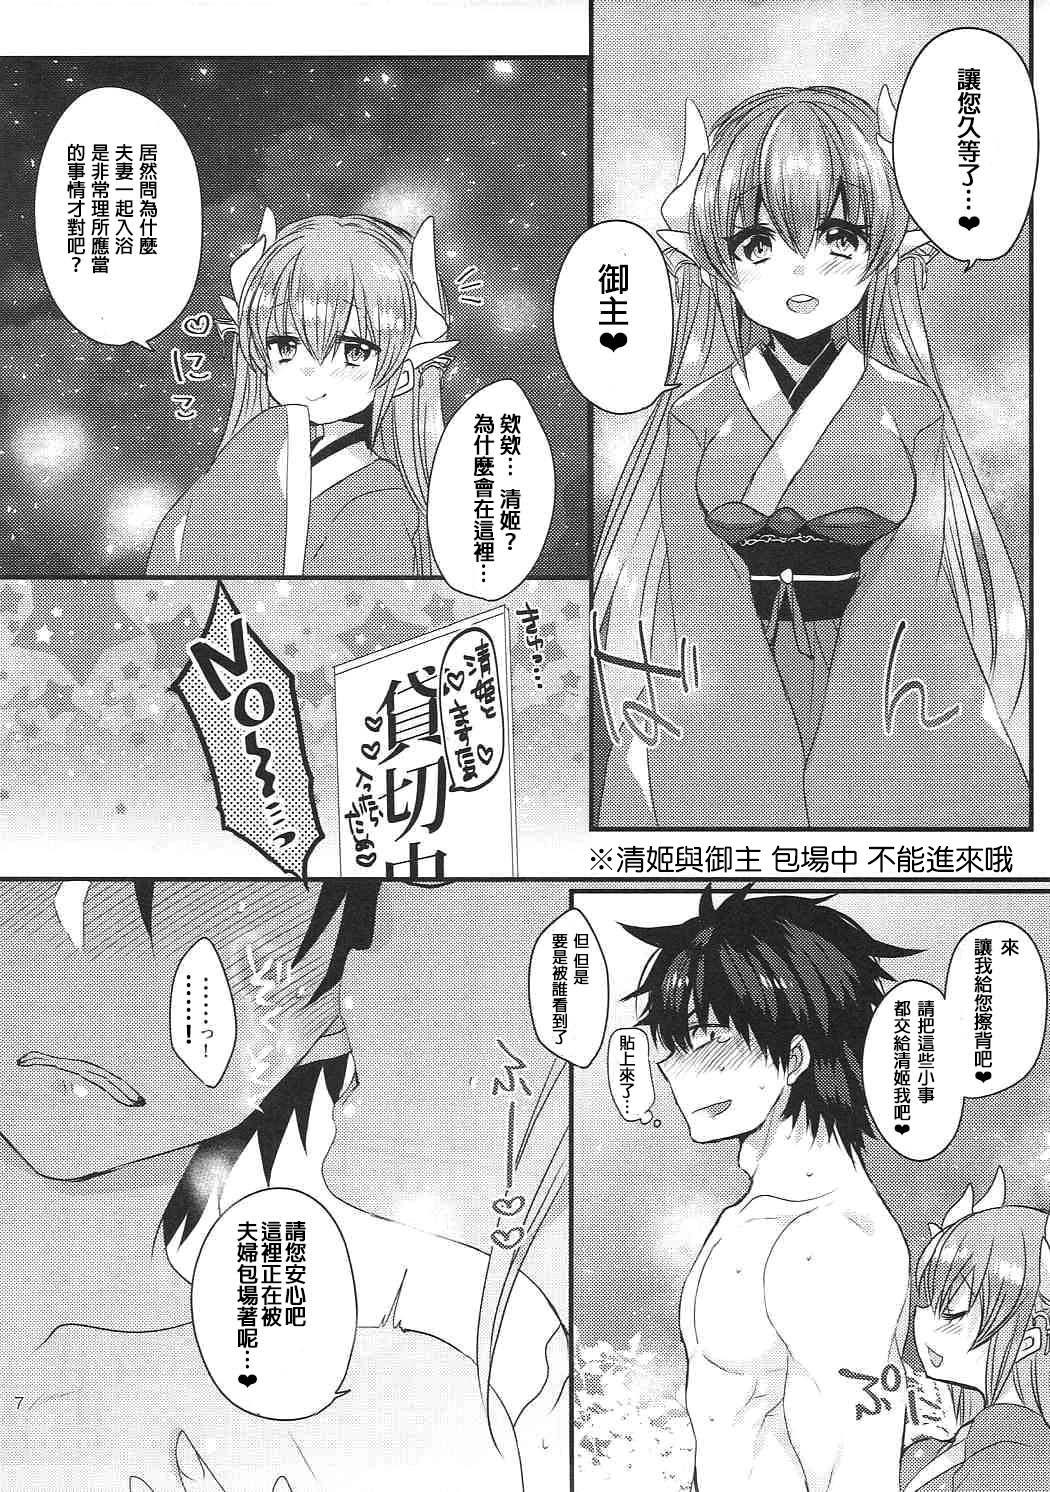 Freaky Kiyohime to Love Love Ofuro Time - Fate grand order Blackdick - Page 7